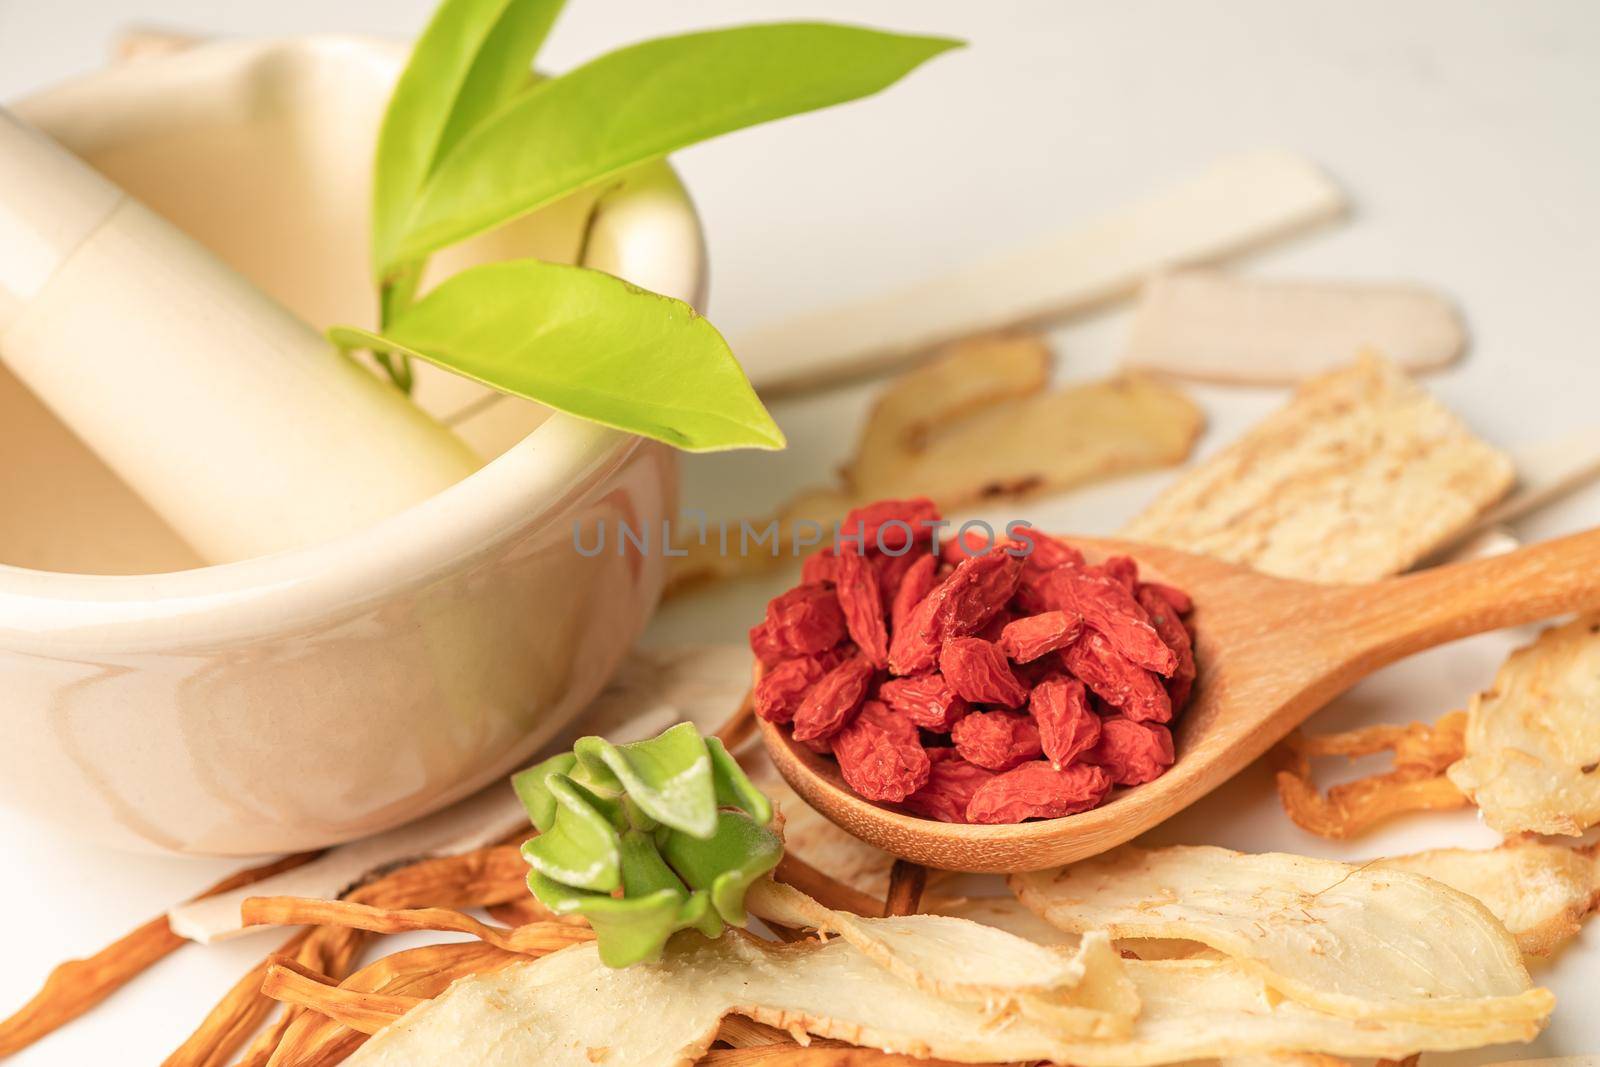 Chinese herb medicine with goji berries for good healthy. by pamai